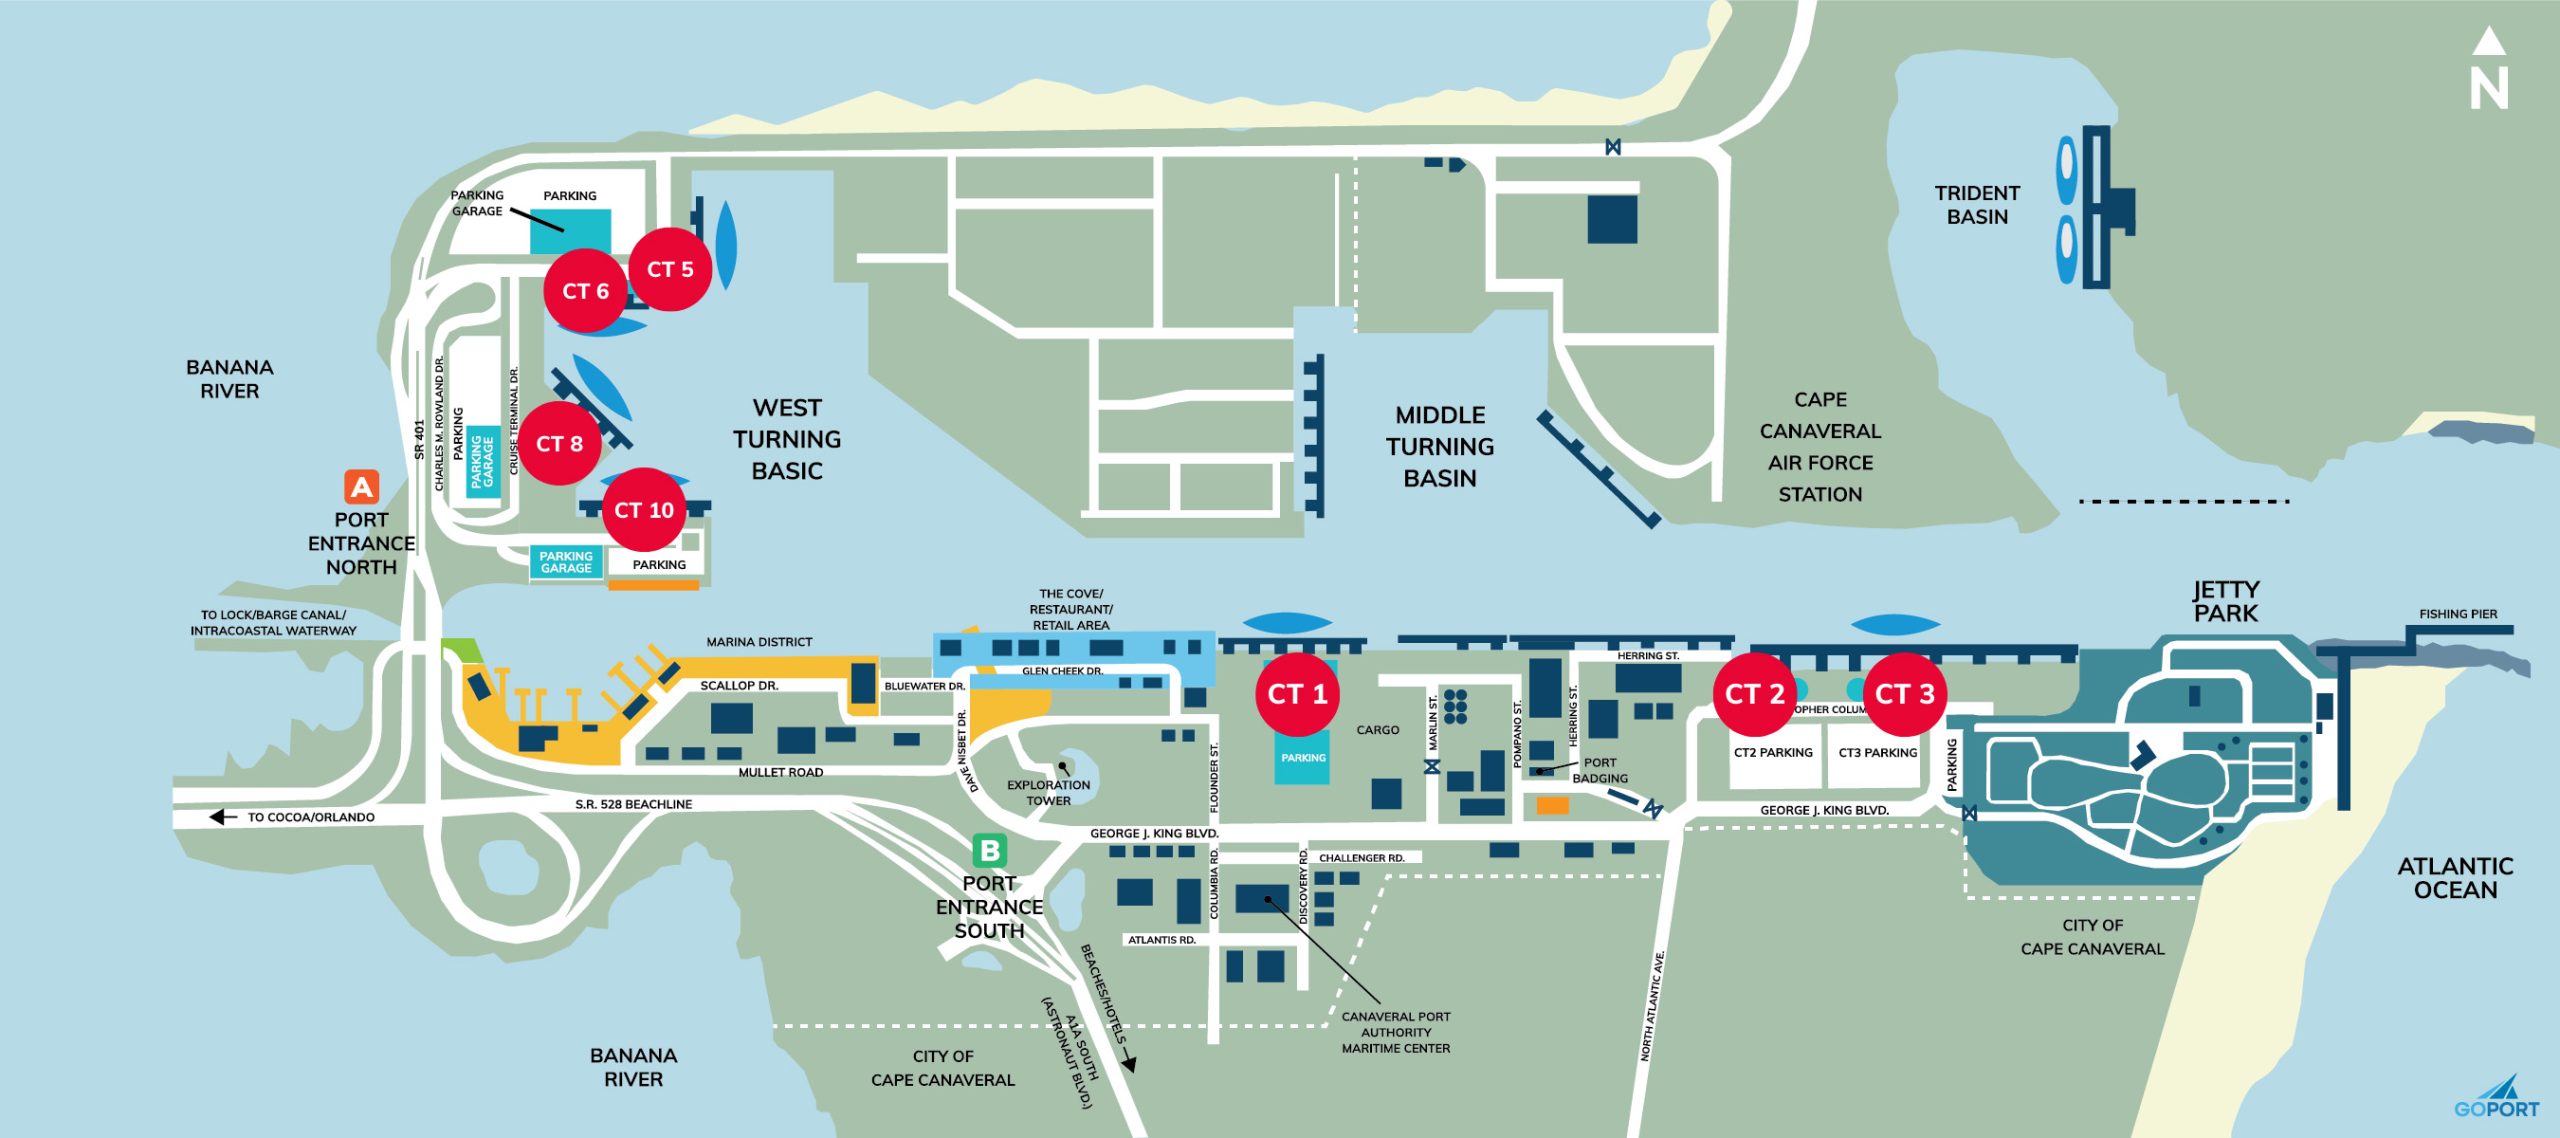 Map of Port Canaveral Cruise terminals marked with red pins for each